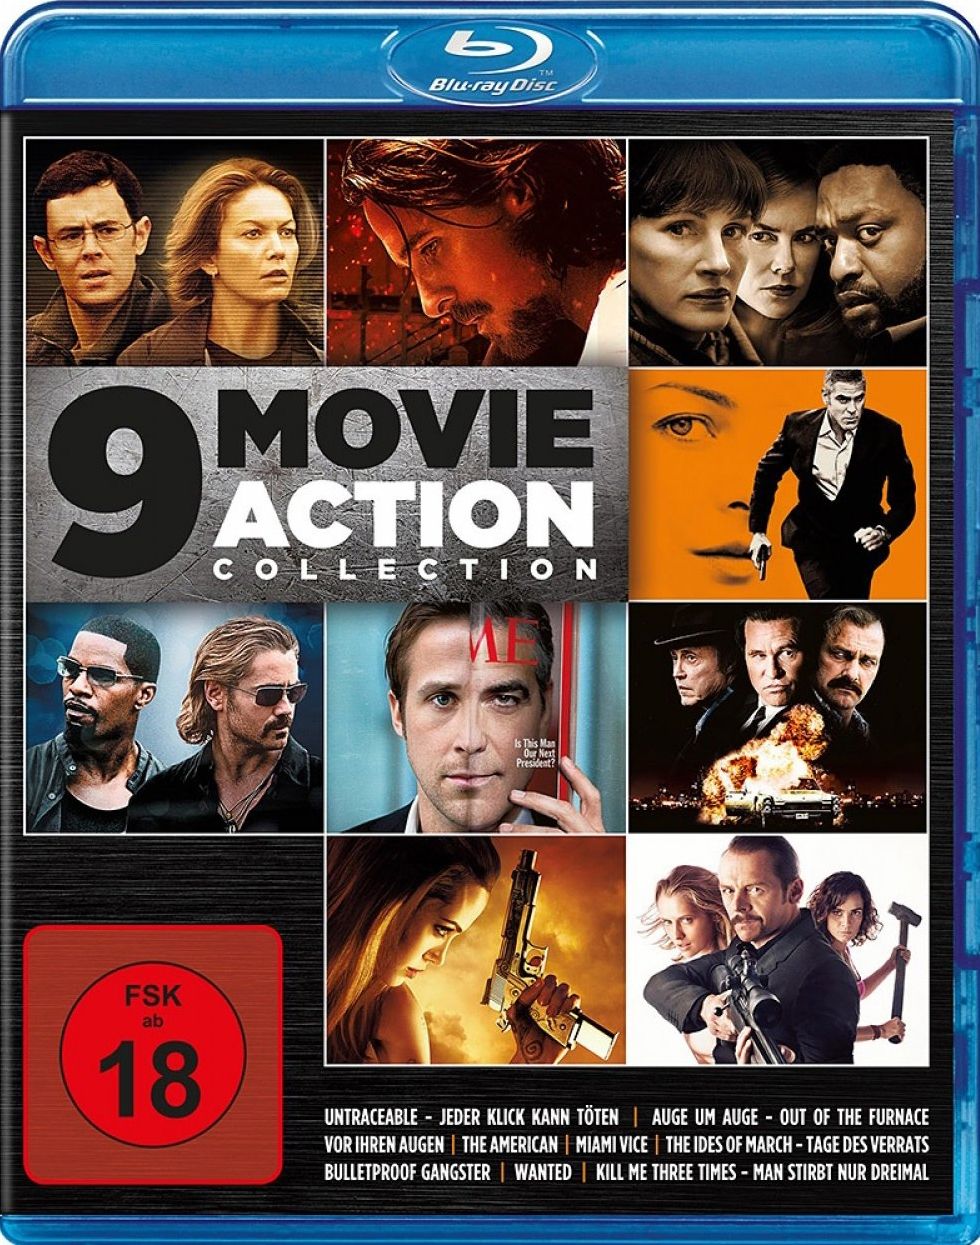 9 Movie Action Collection (3 Discs) (BLURAY)